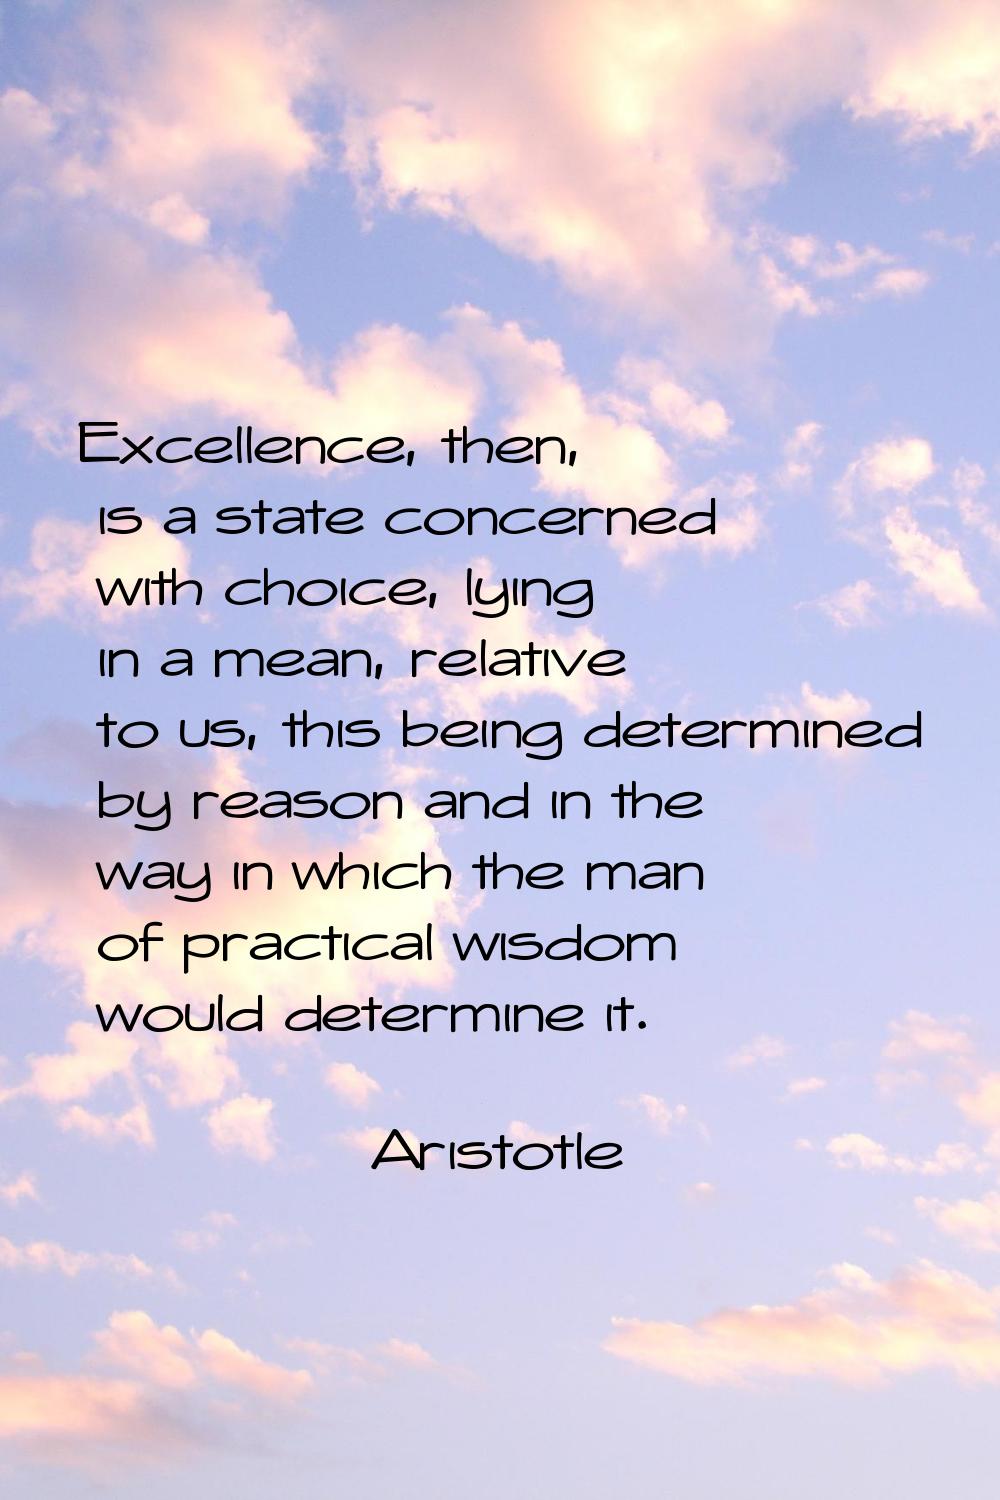 Excellence, then, is a state concerned with choice, lying in a mean, relative to us, this being det